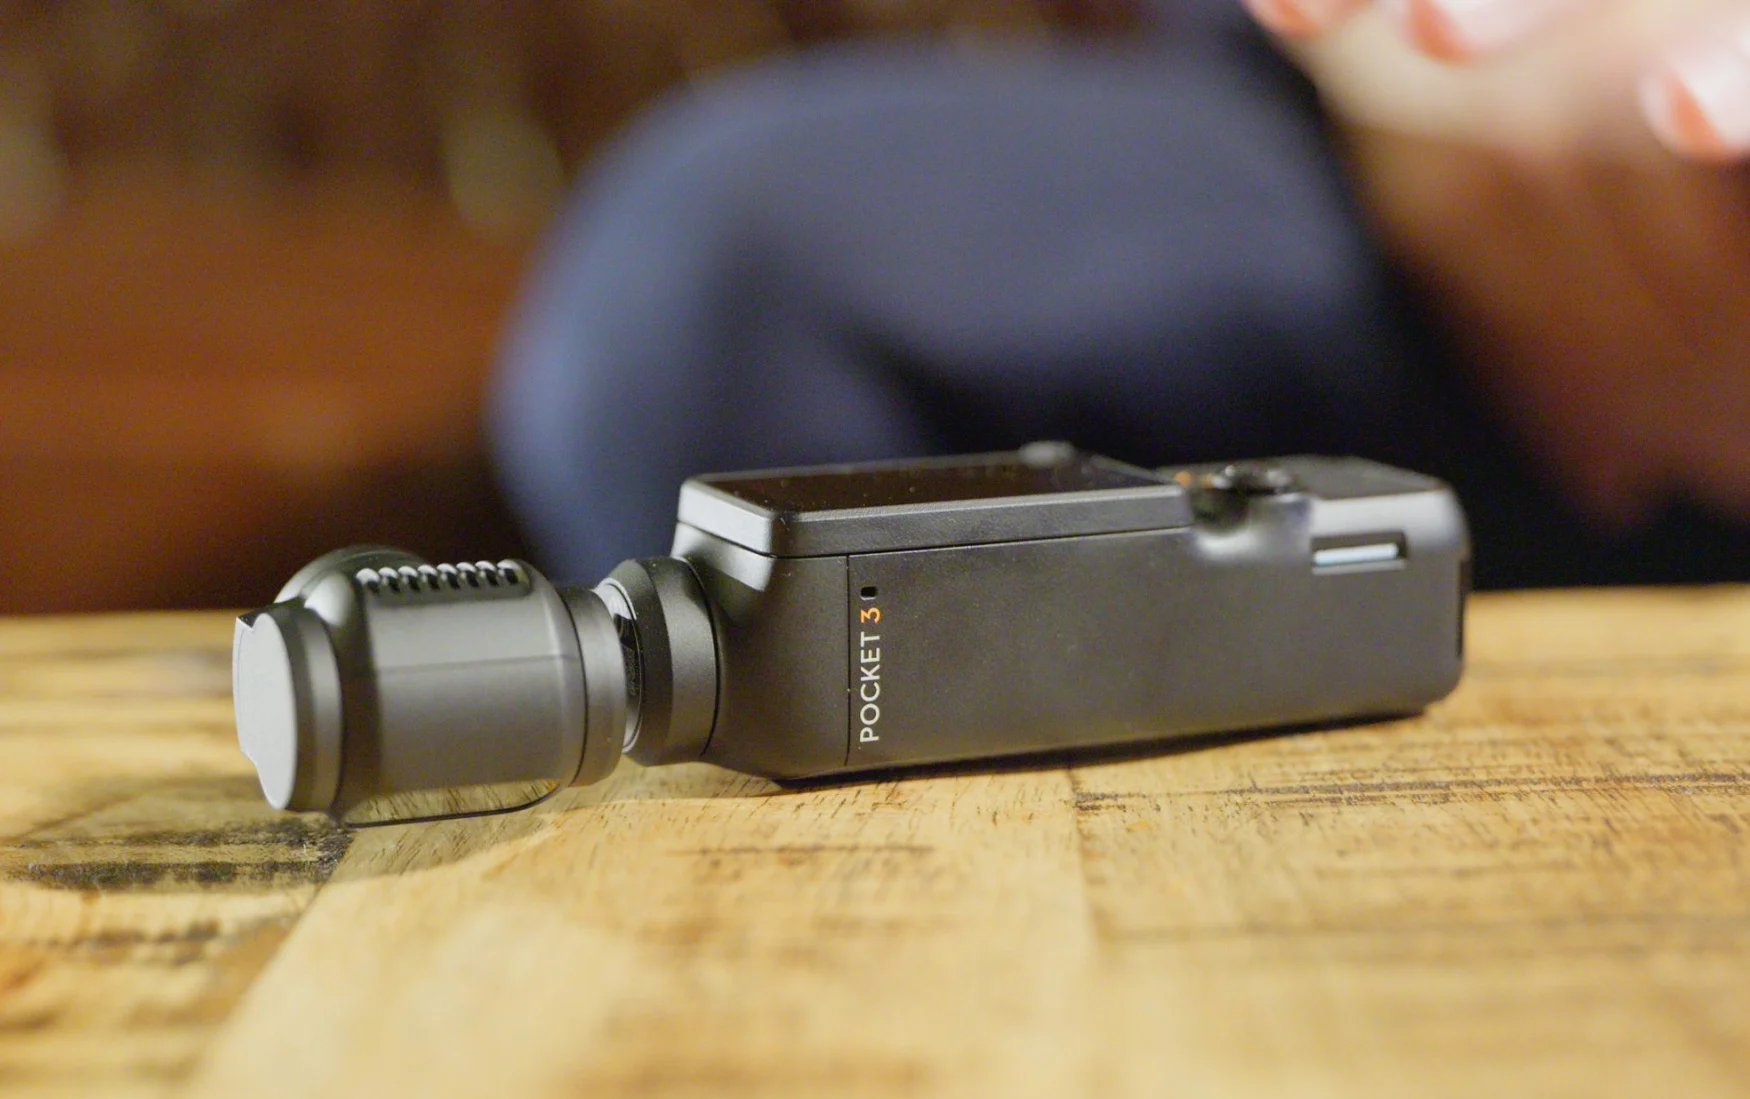 DJI Osmo Pocket 3 review: Maybe the only vlogging camera you need